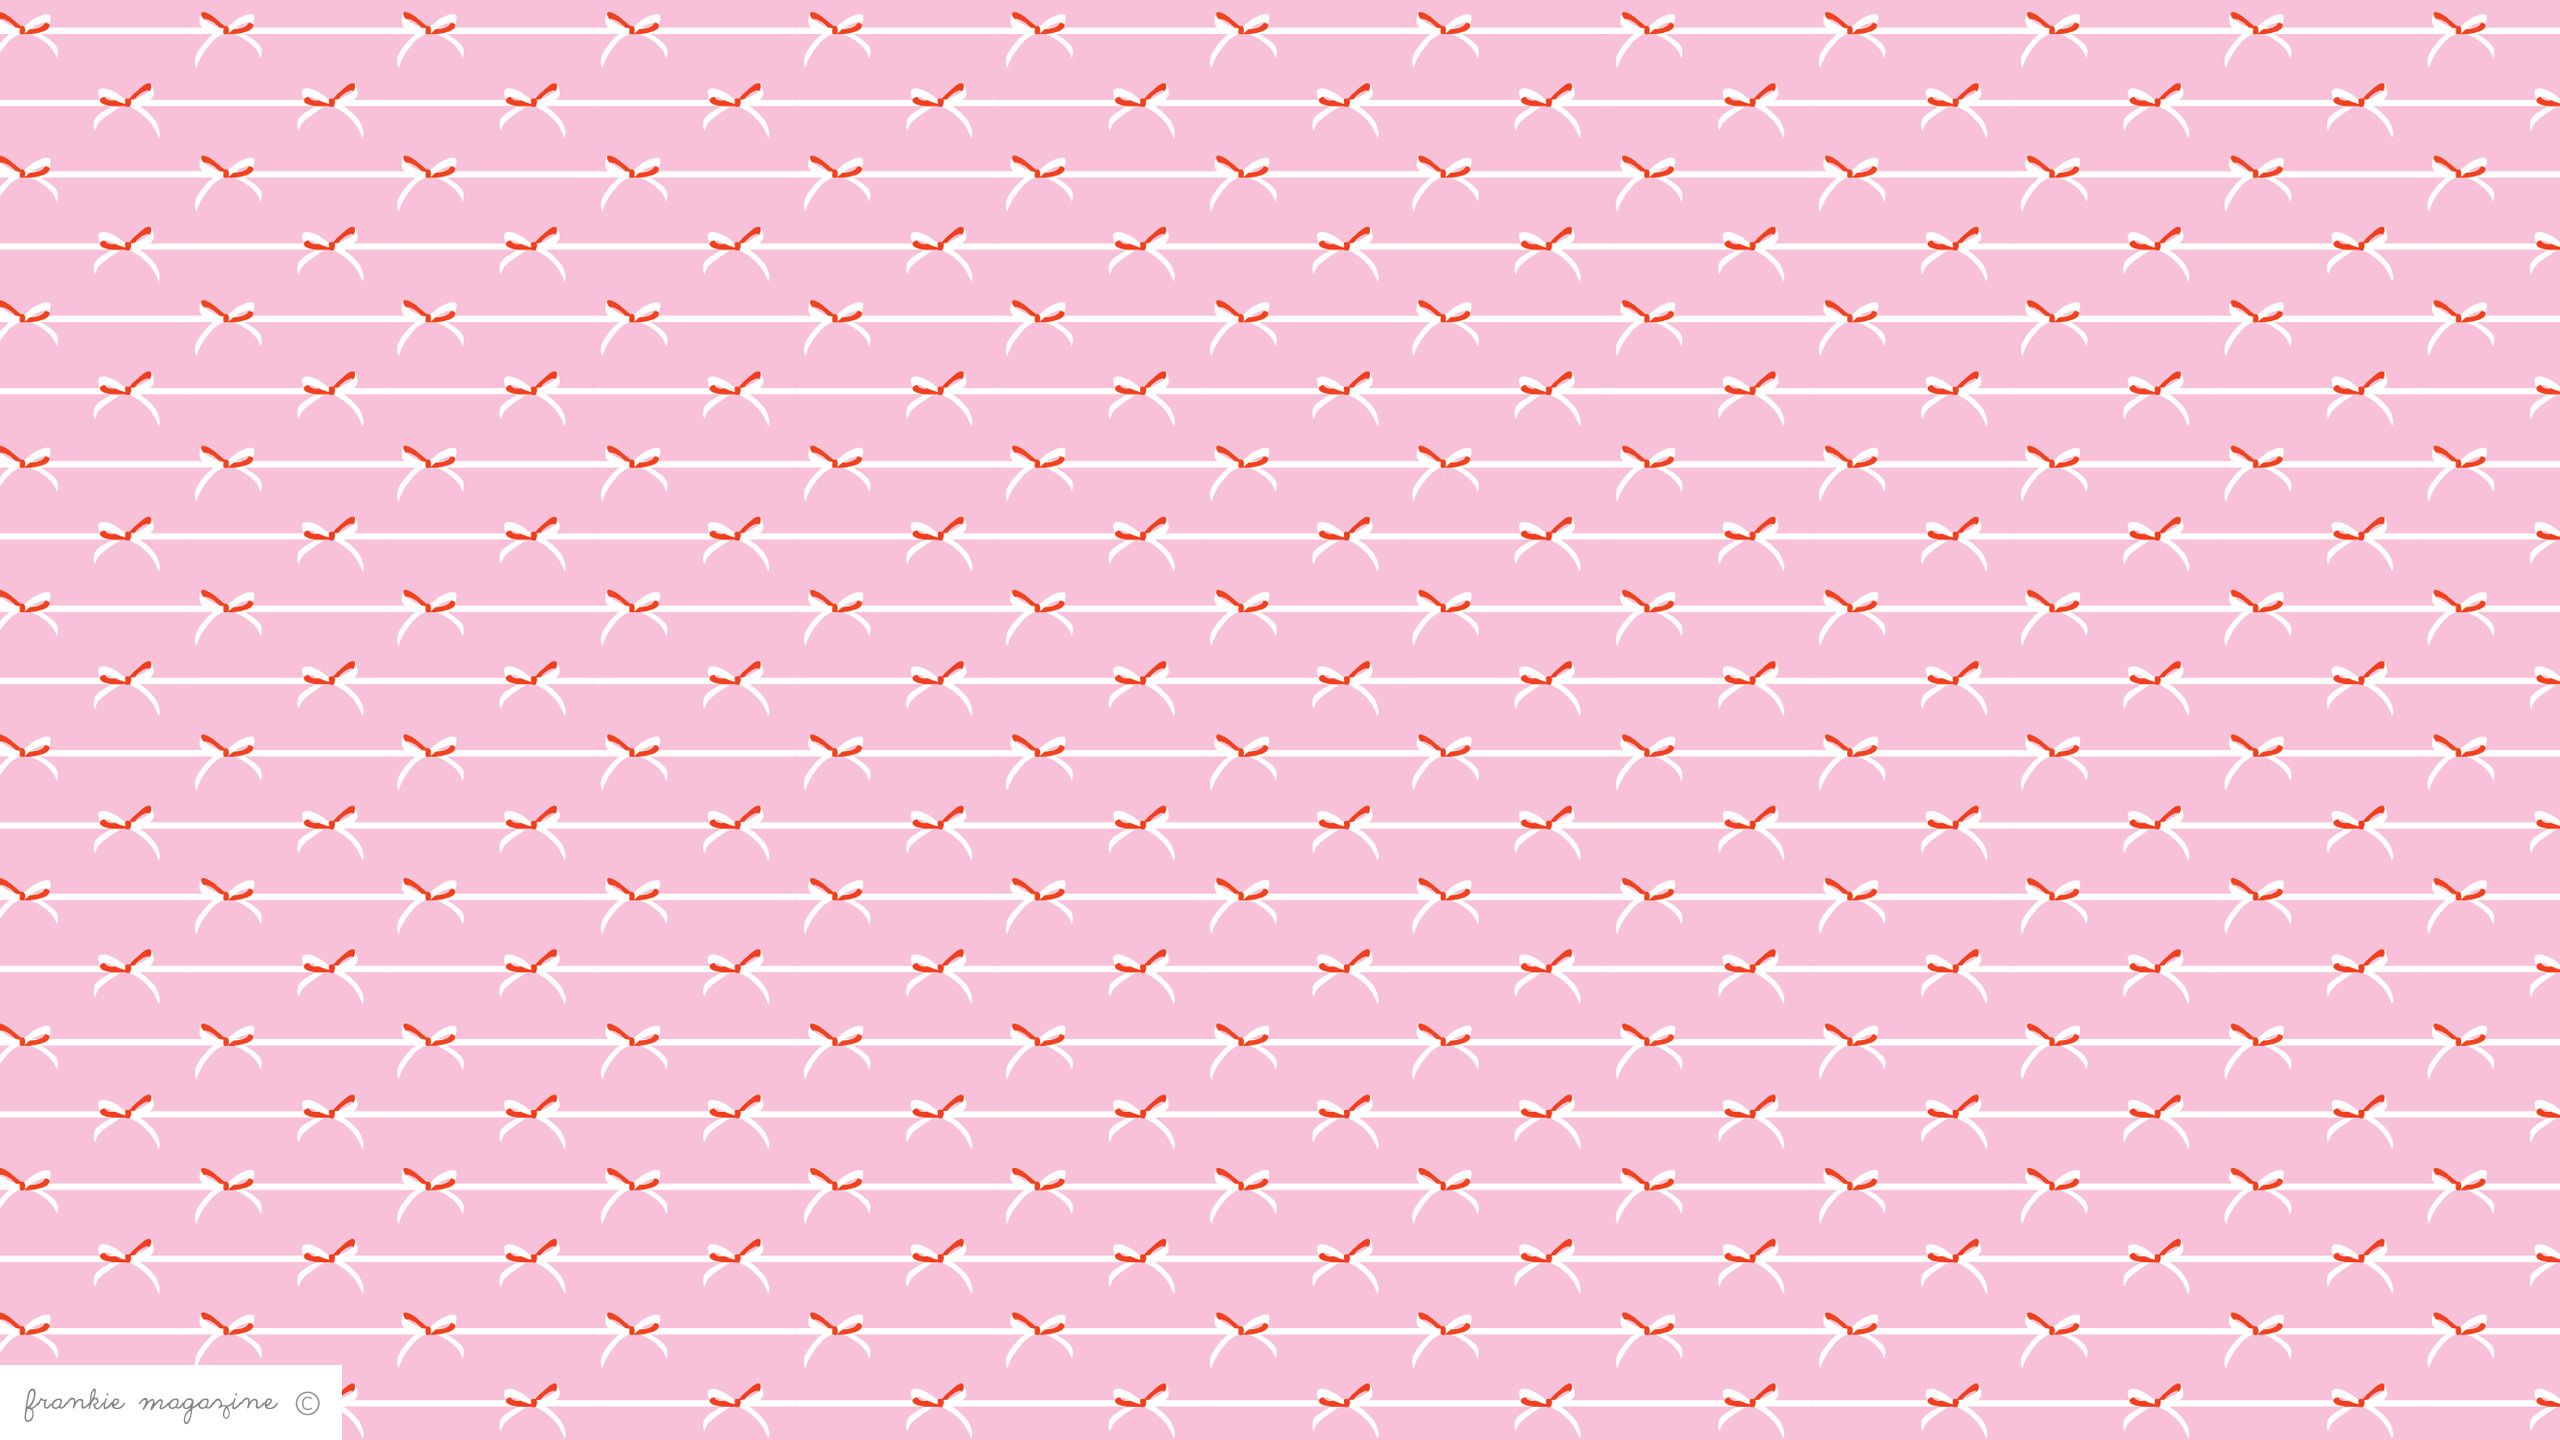 10 Outstanding pink aesthetic wallpaper horizontal You Can Use It At No ...